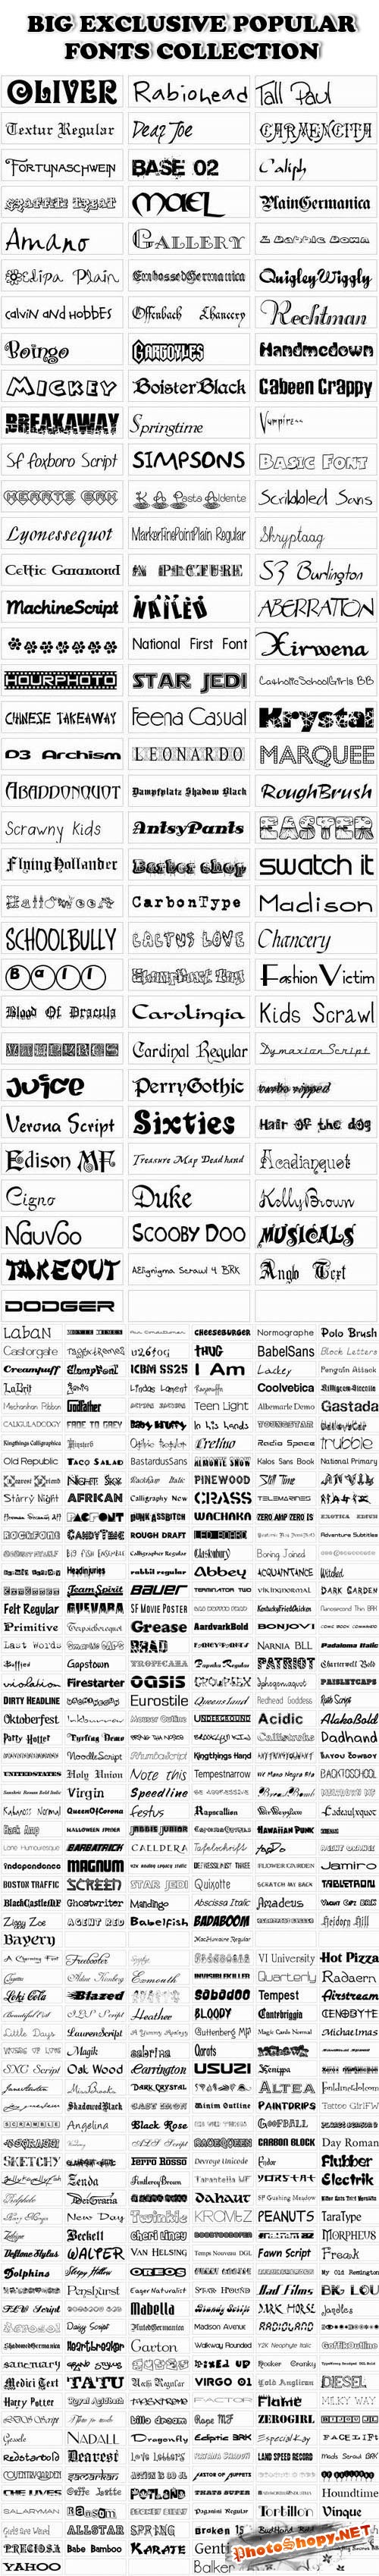 Big Exclusive Collection Popular Fonts